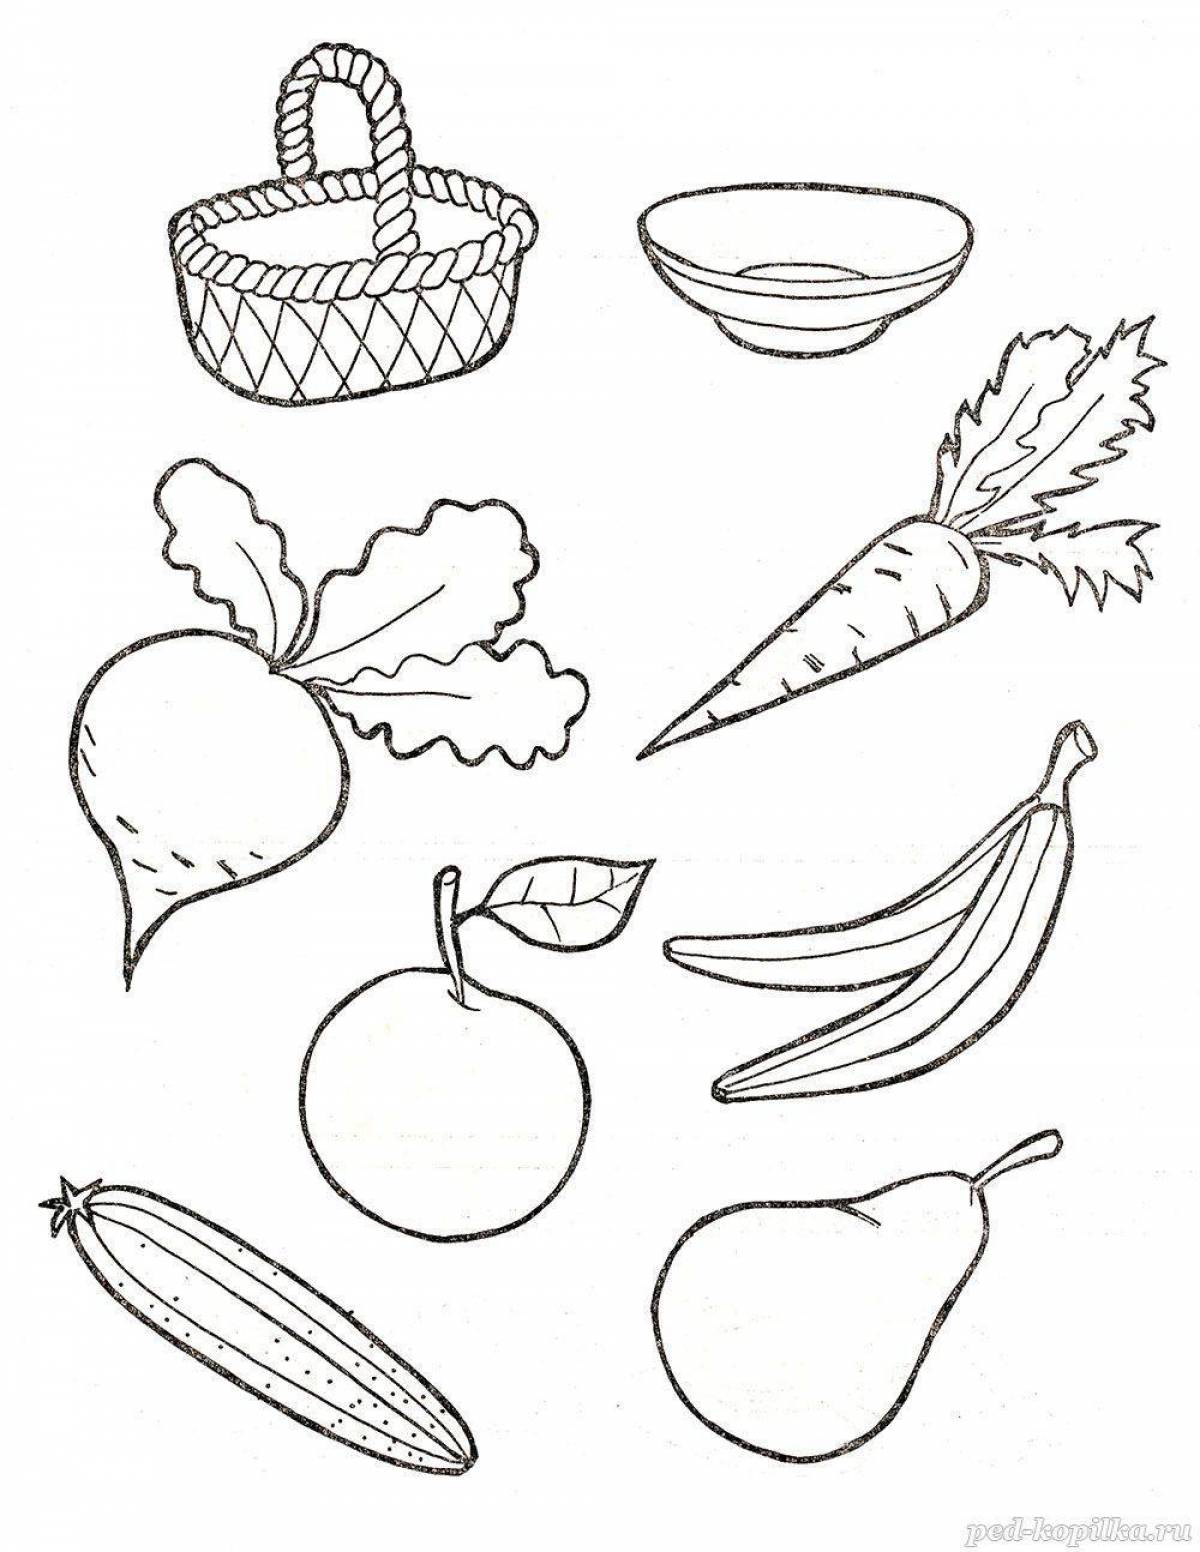 Bright and cheerful vegetable coloring book